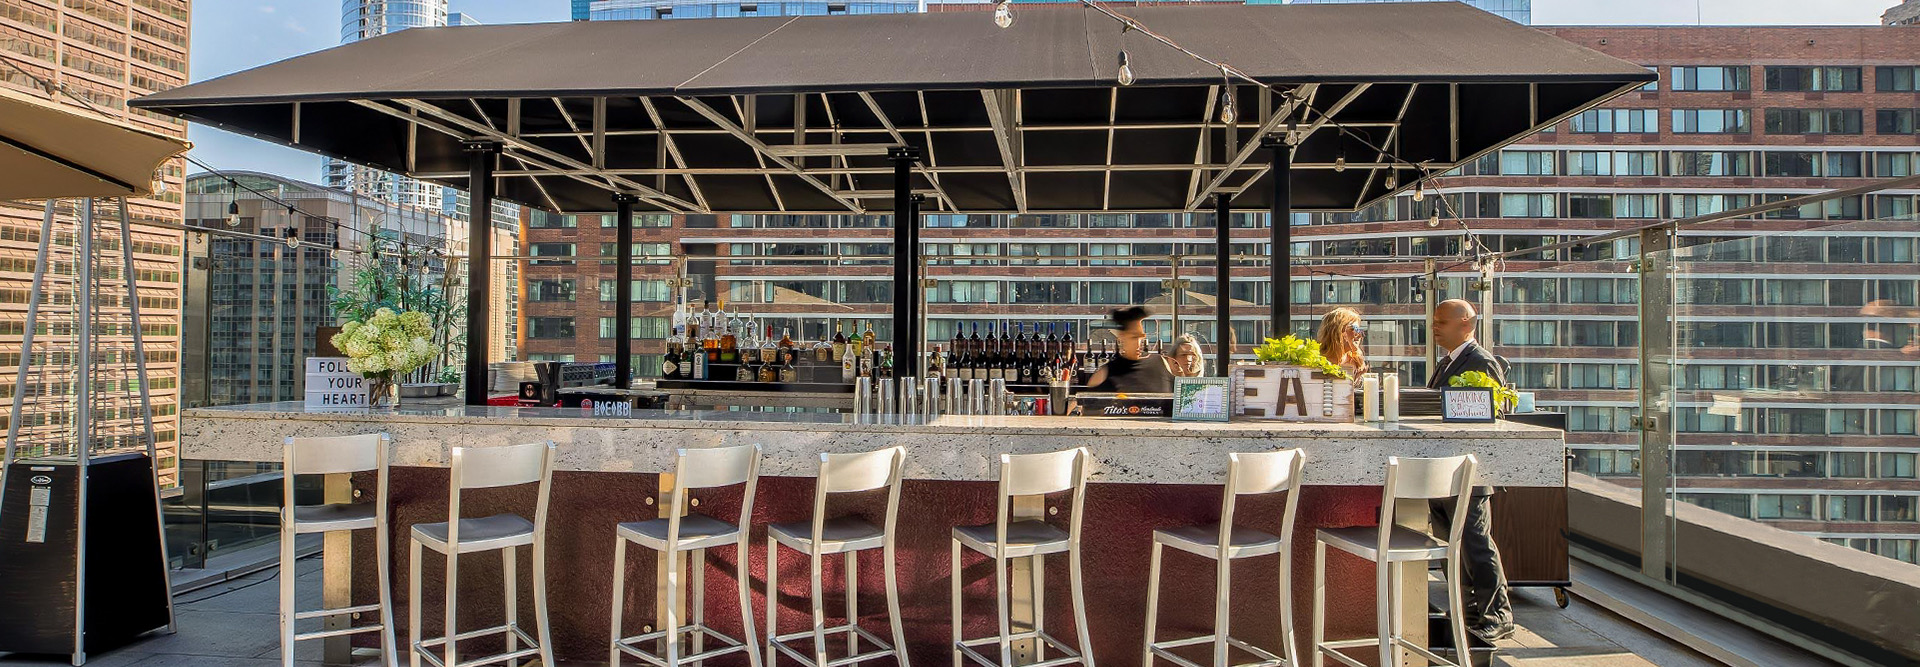 An outdoor bar and stools on a rooftop terrace with people sitting at it.